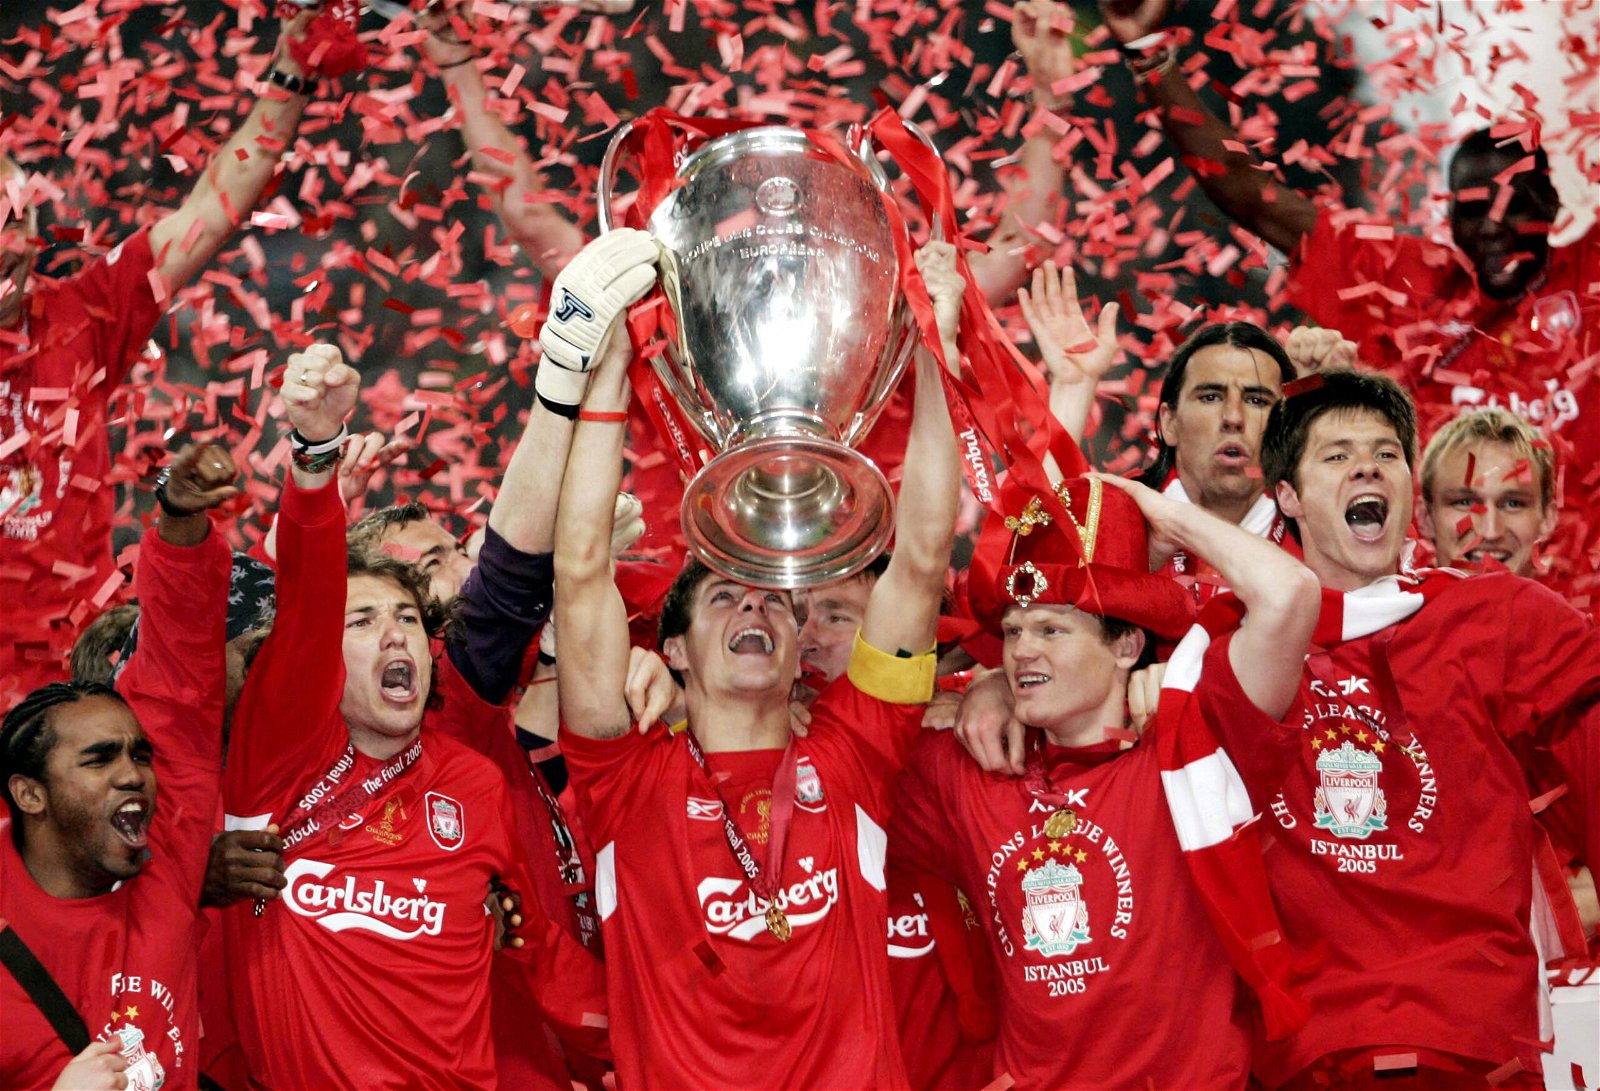 Liverpool Champions League titles - how many Champions League wins